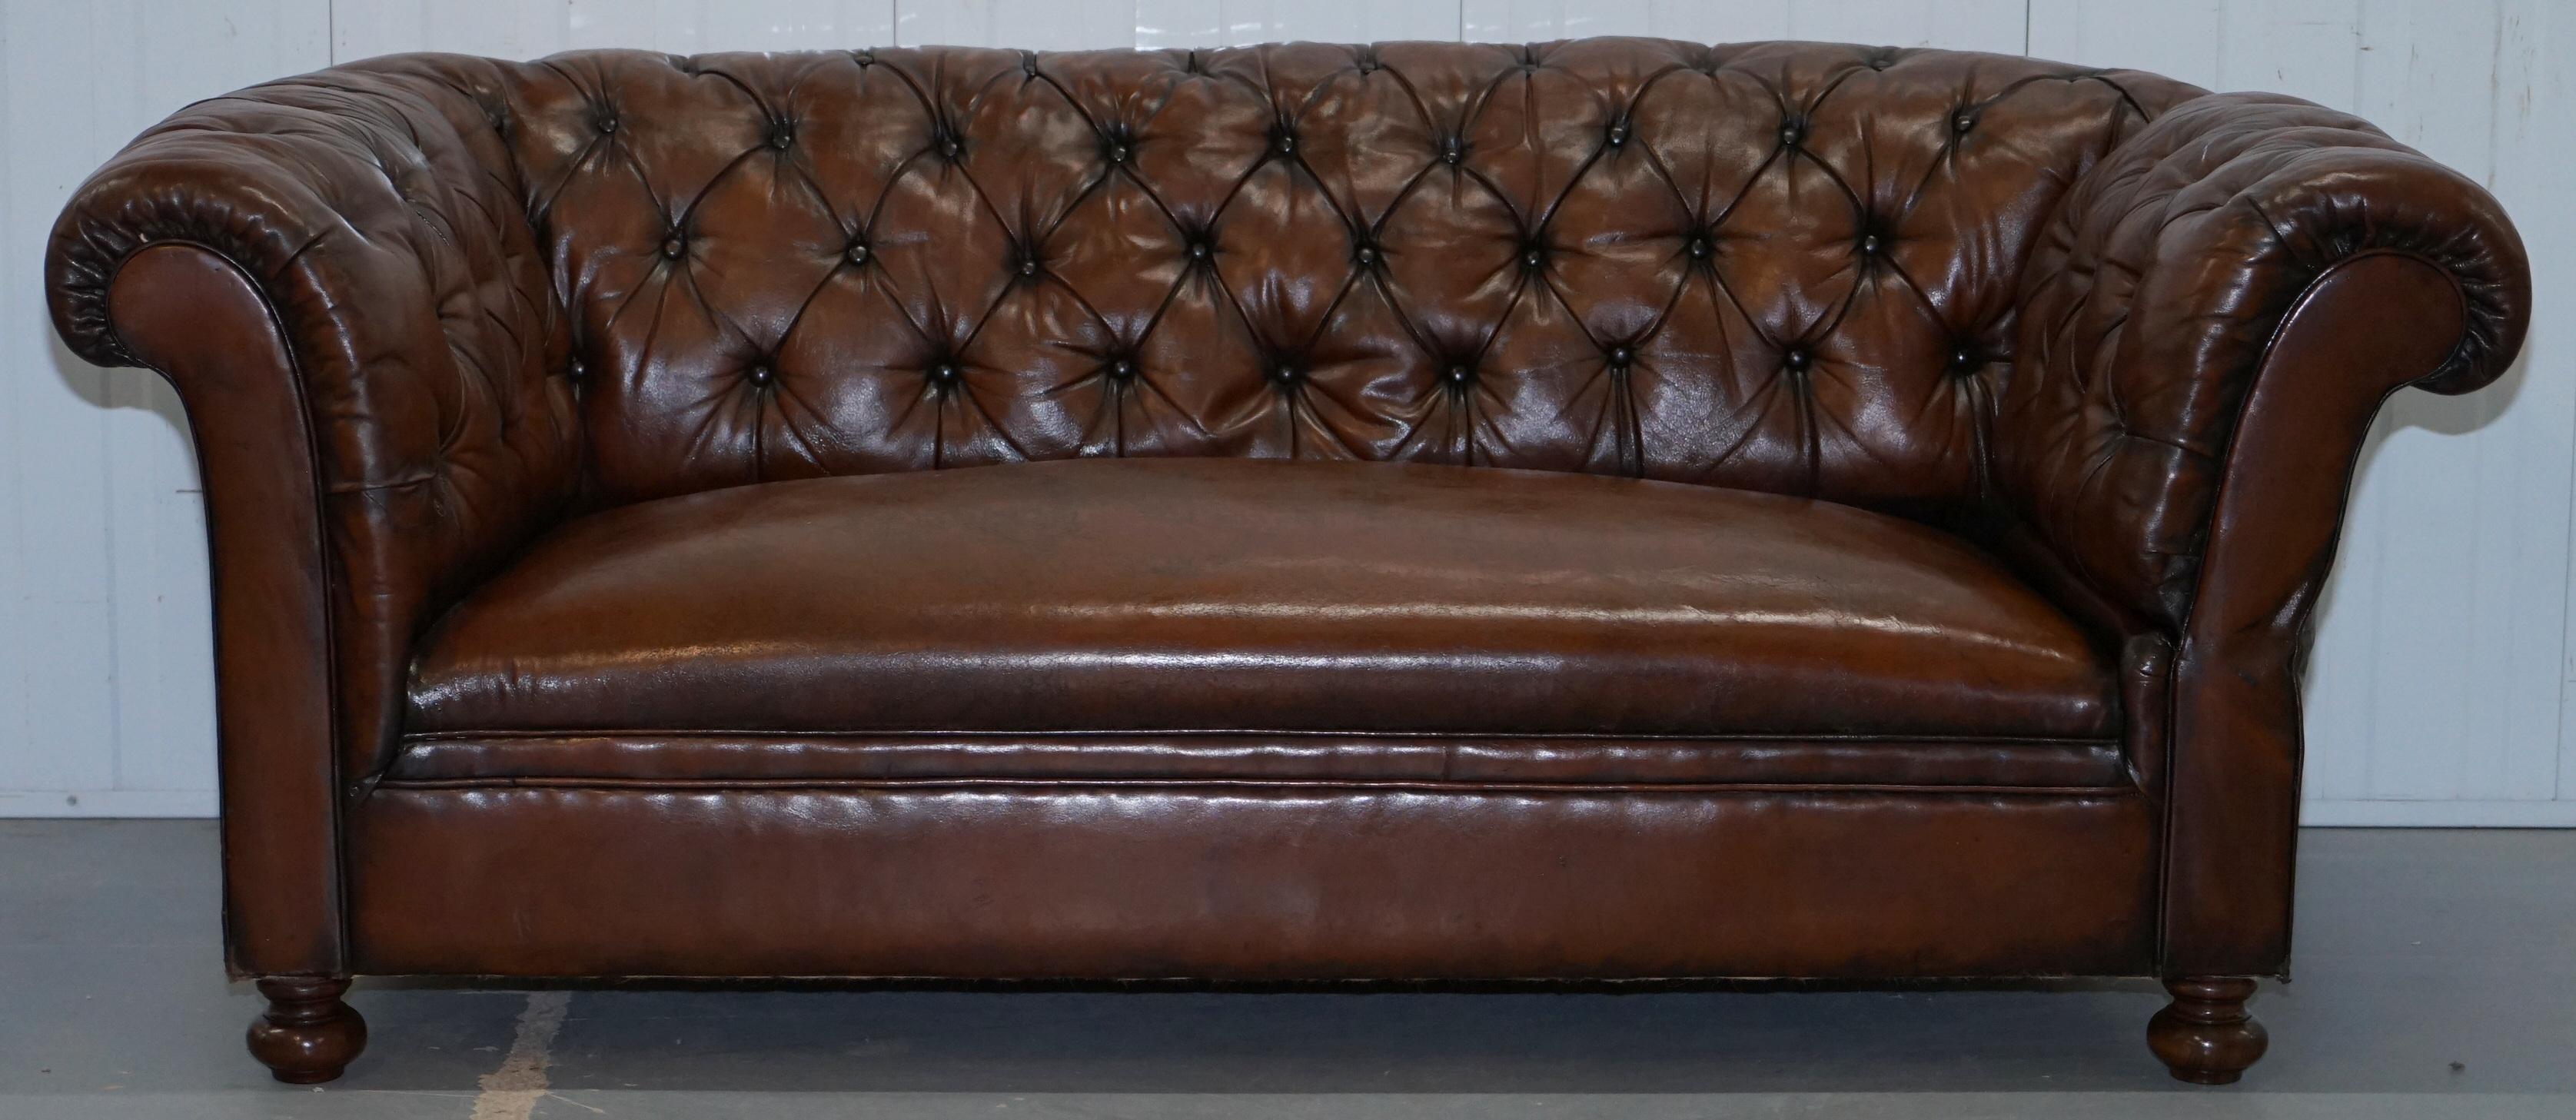 We are delighted to offer for sale this stunning fully restored Victorian circa 1880 hand dyed Chesterfield two-seat drop arm sofa 

The sofa has been fully restored to include having the old colour stripped out, it has then been hand dyed this